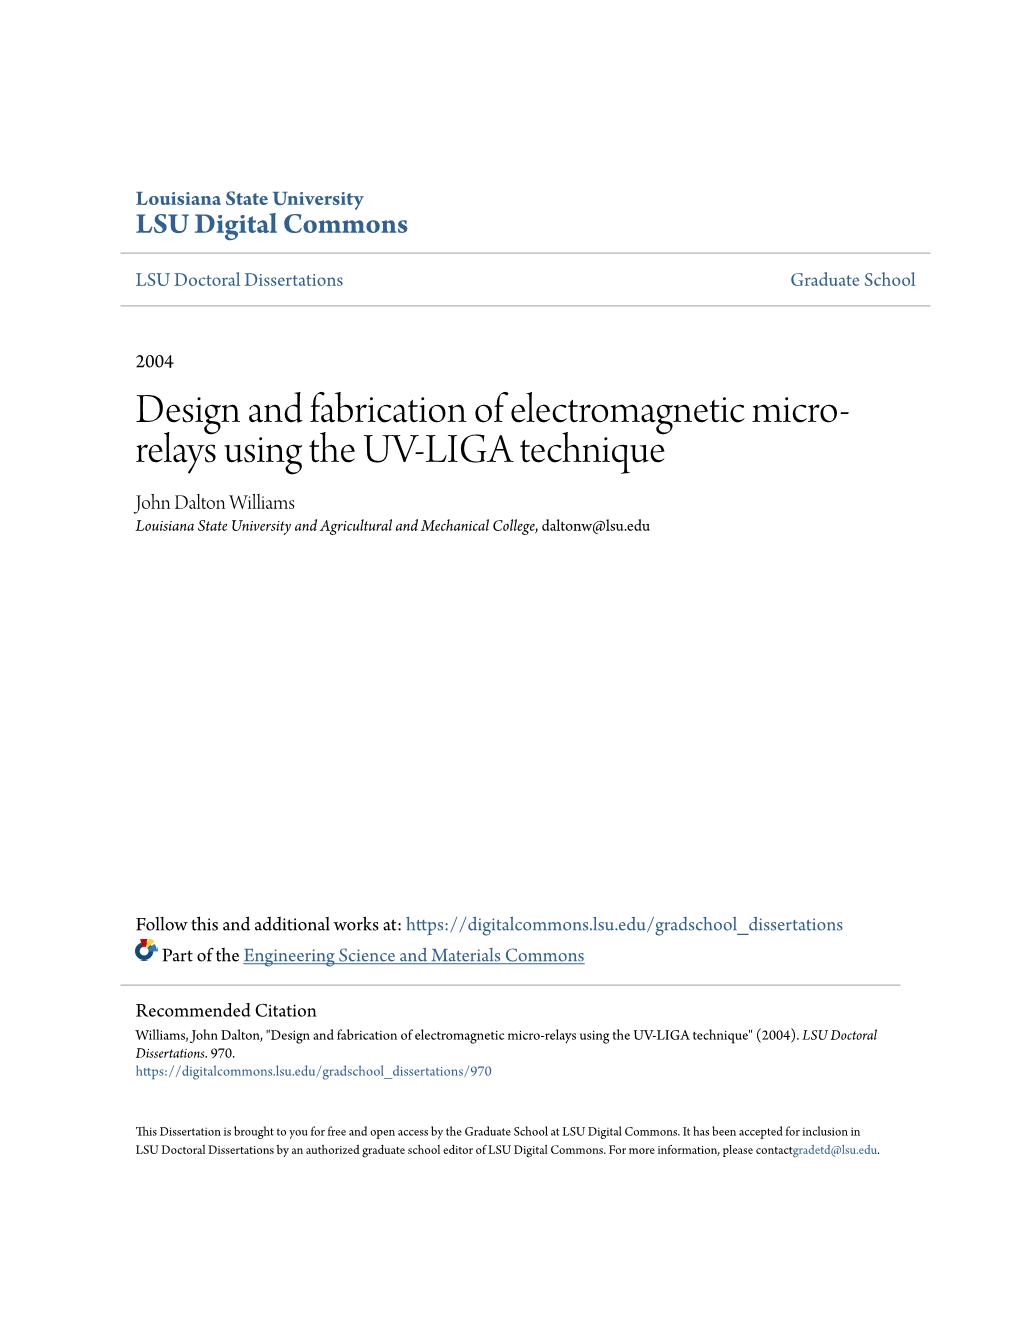 Design and Fabrication of Electromagnetic Micro-Relays Using the UV-LIGA Technique" (2004)